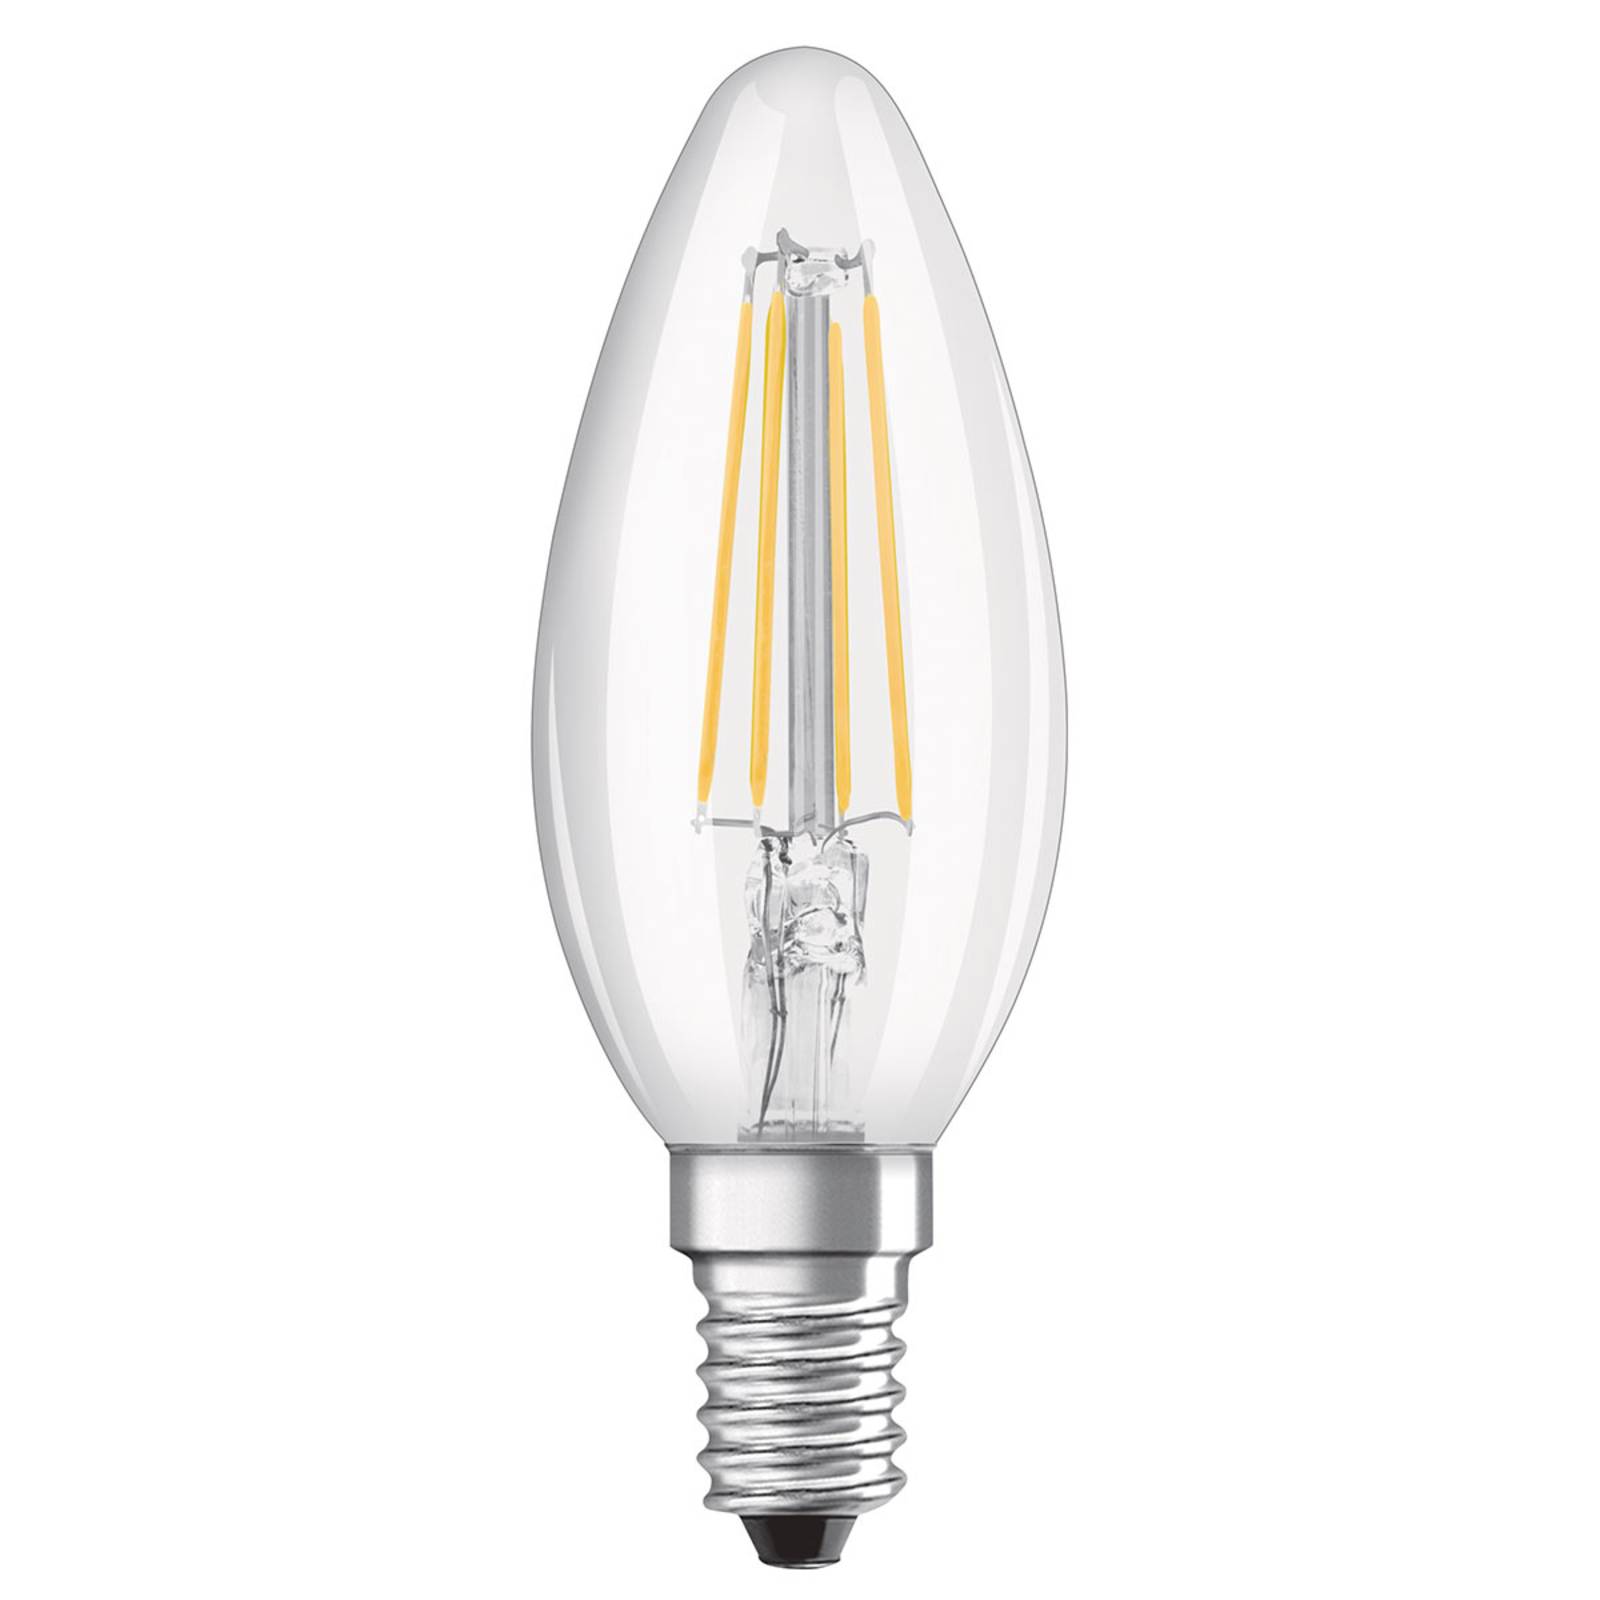 OSRAM LED CLB E14 4 W Star+ Relax&Active claire